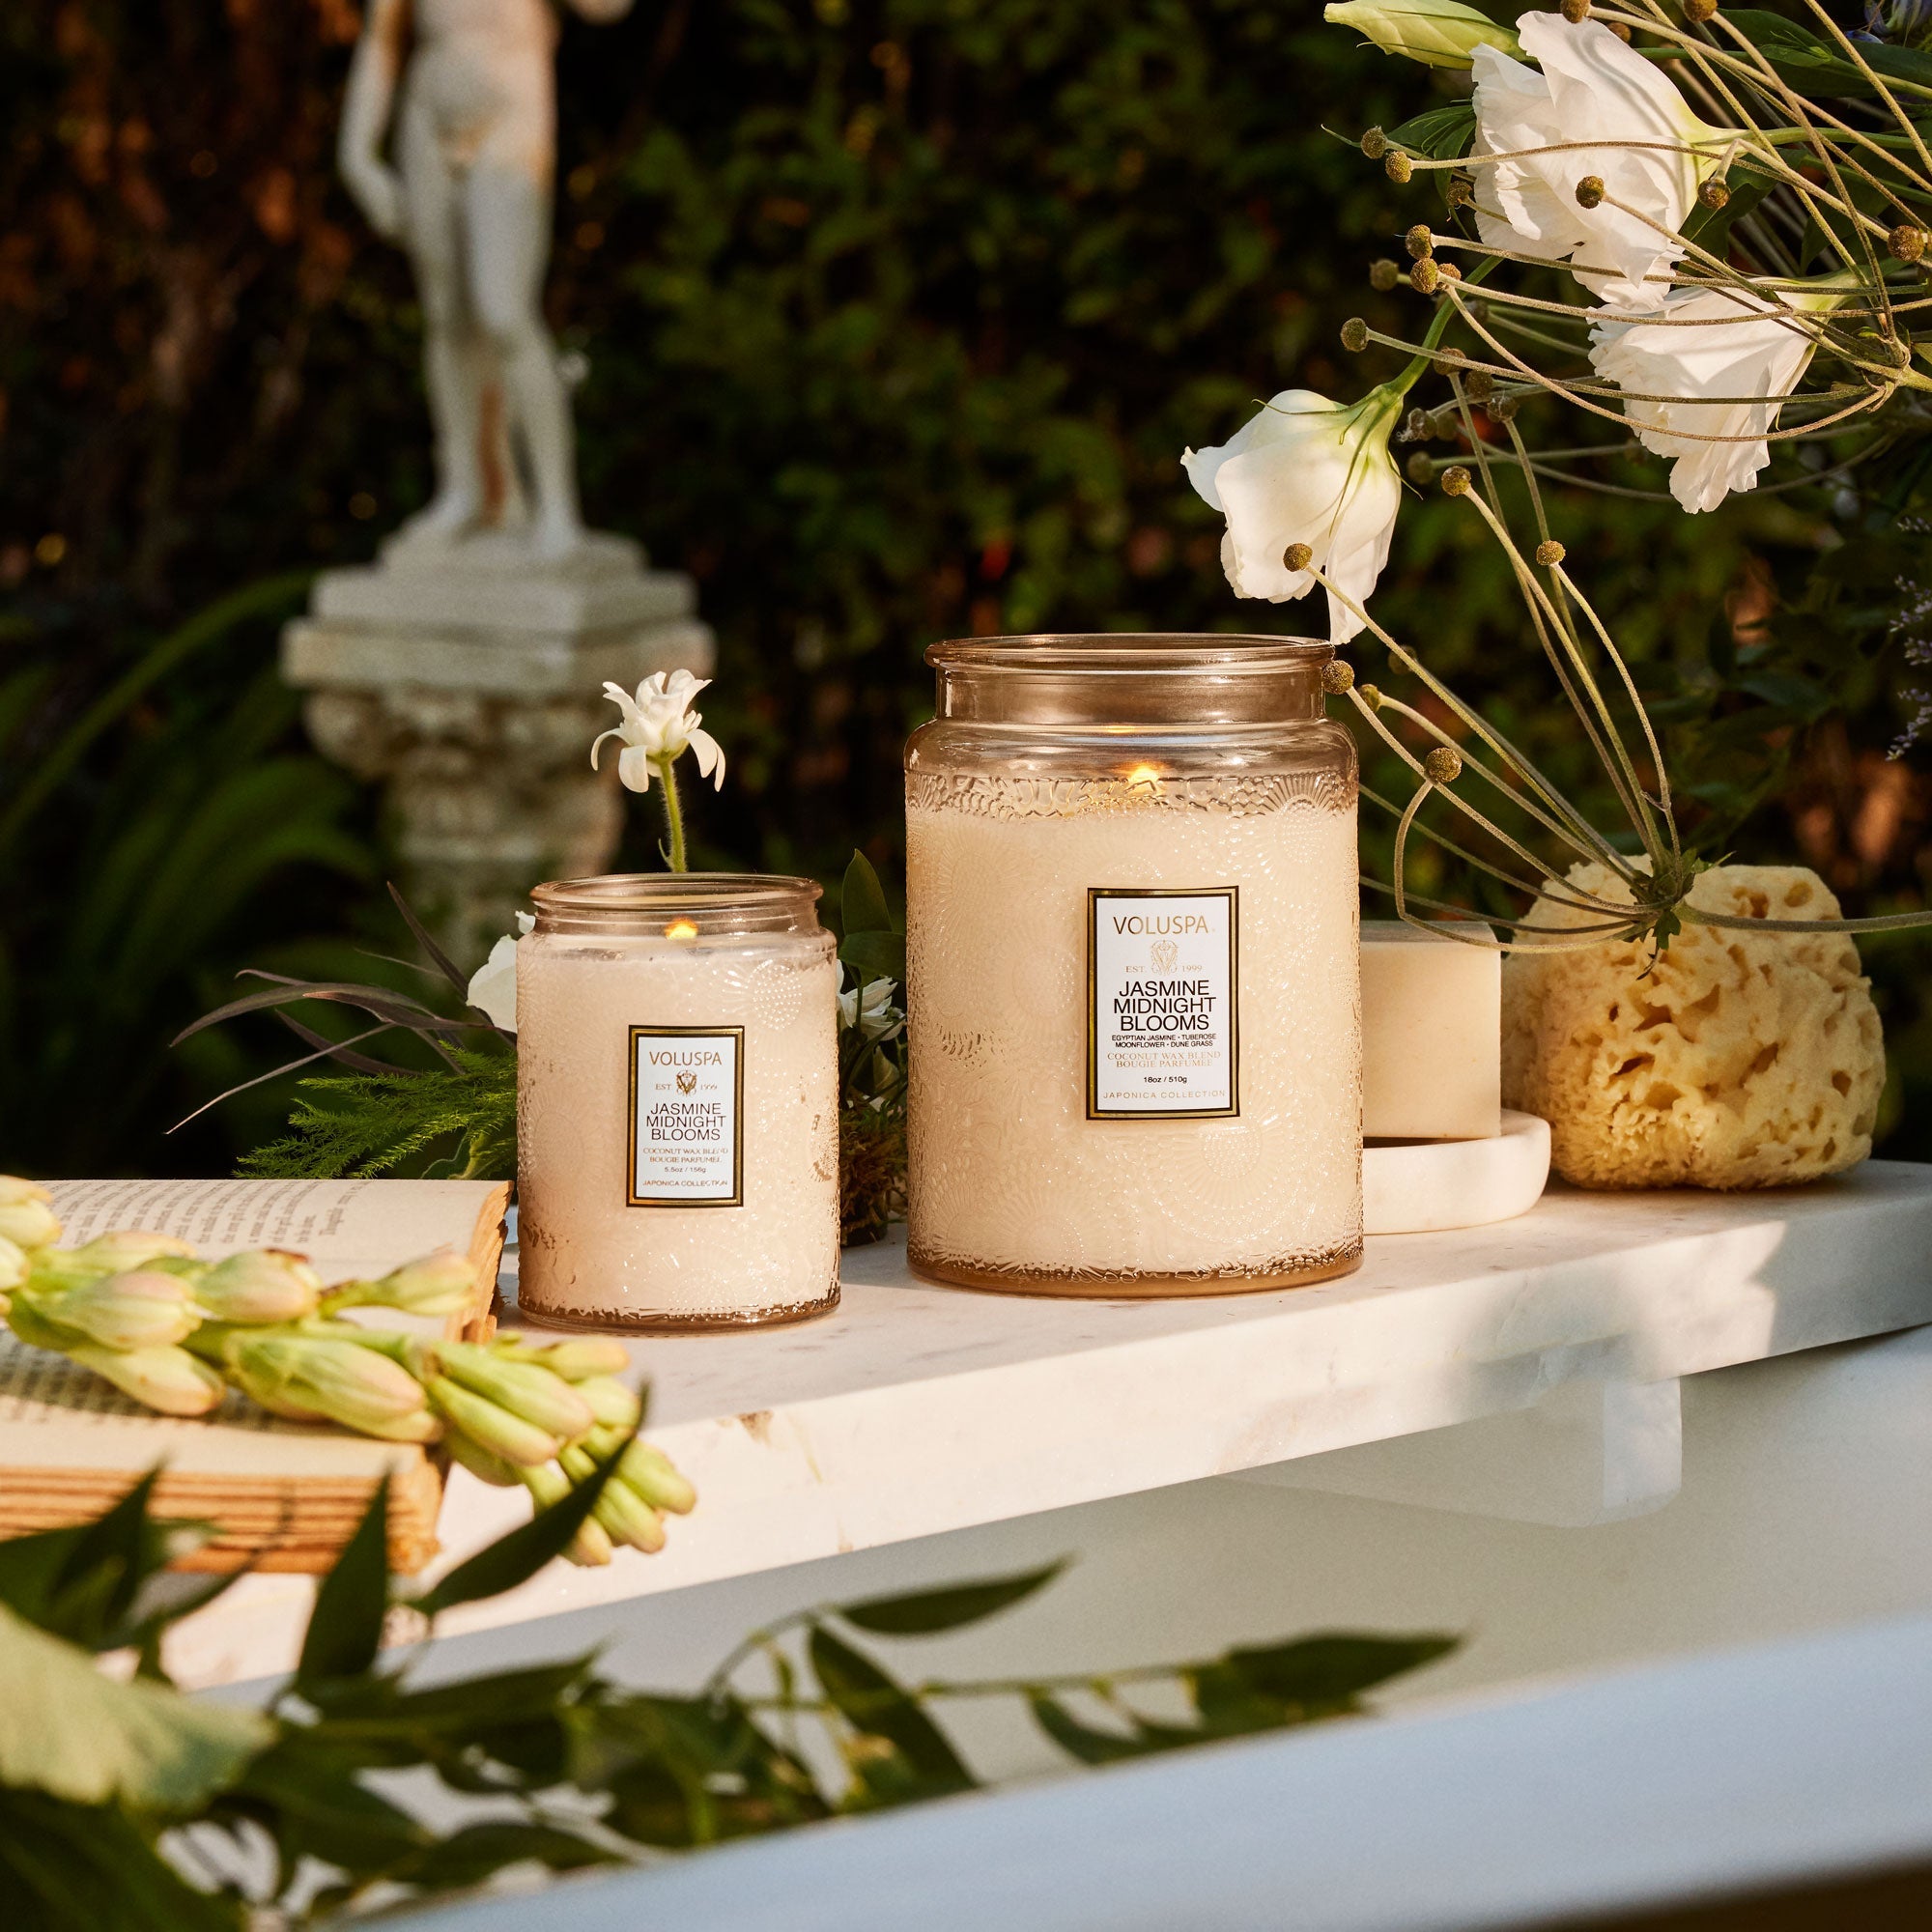 Discover Wood Wick Jasmine Scent Candle 13 oz.